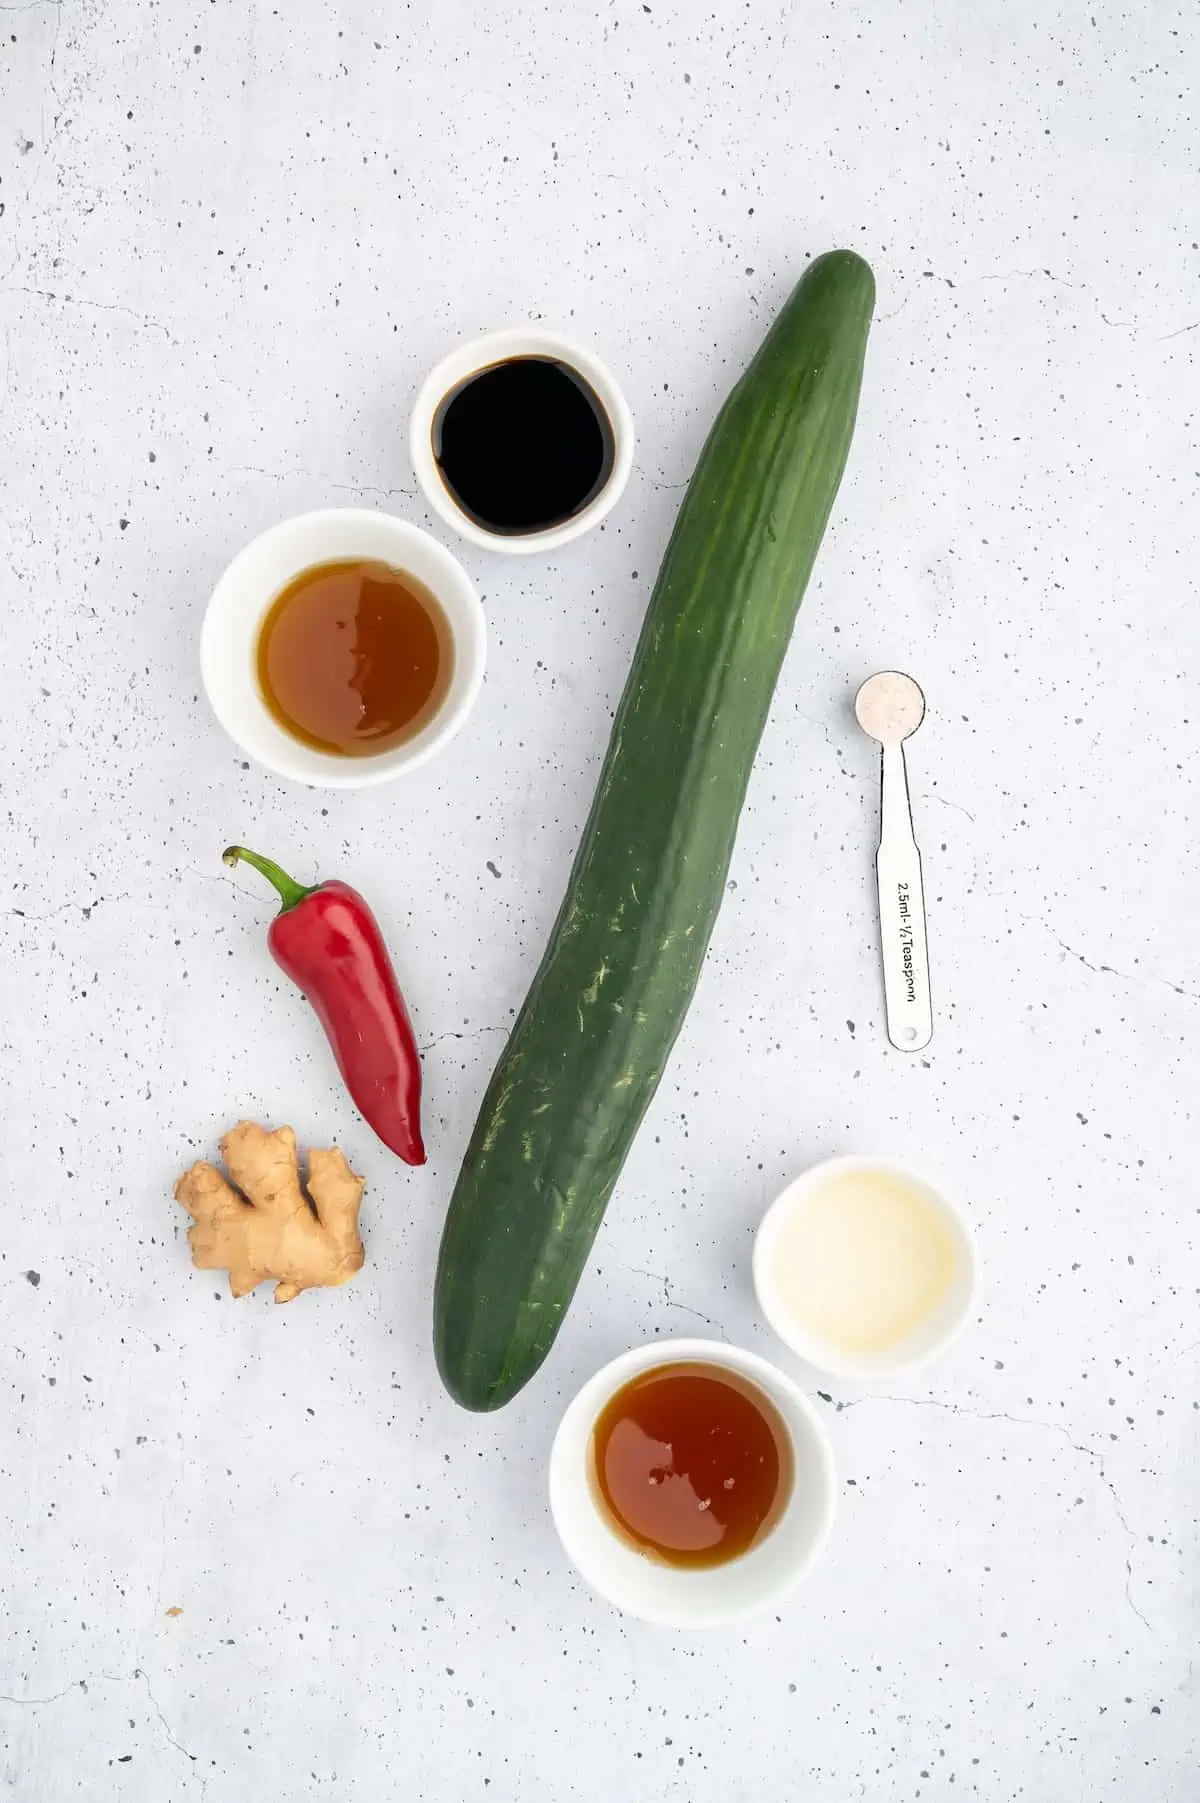 Ingredients for making Japanese pickled cucumbers.